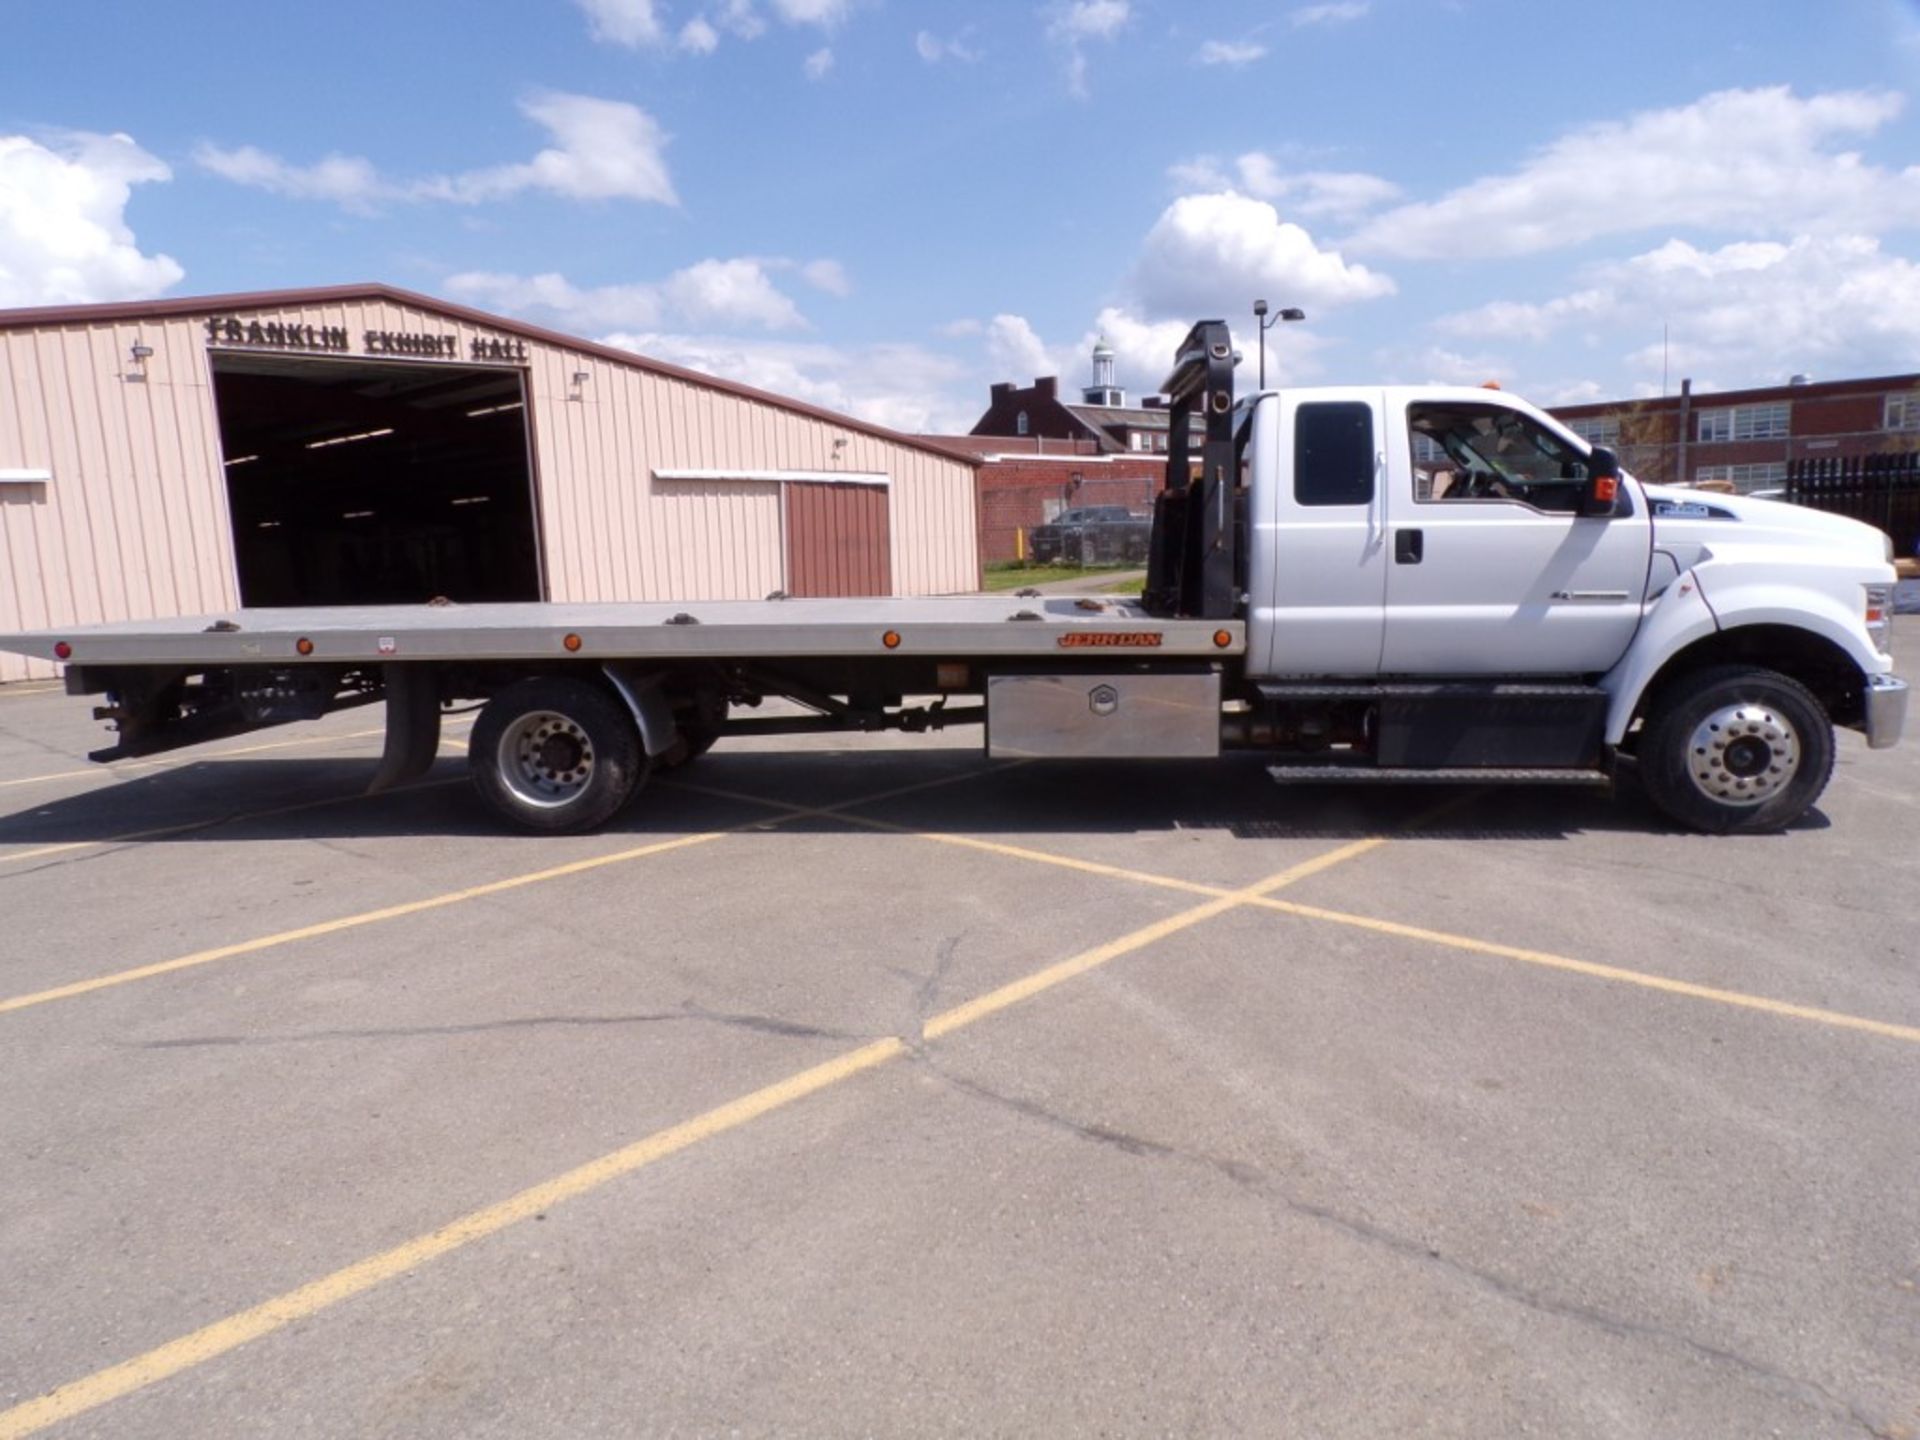 2018 Ford F650 Ext. Cab, Rollback Truck, 6.7 Dsl. Engine, Auto Trans, Air Brakes, 25,900 GVWR,